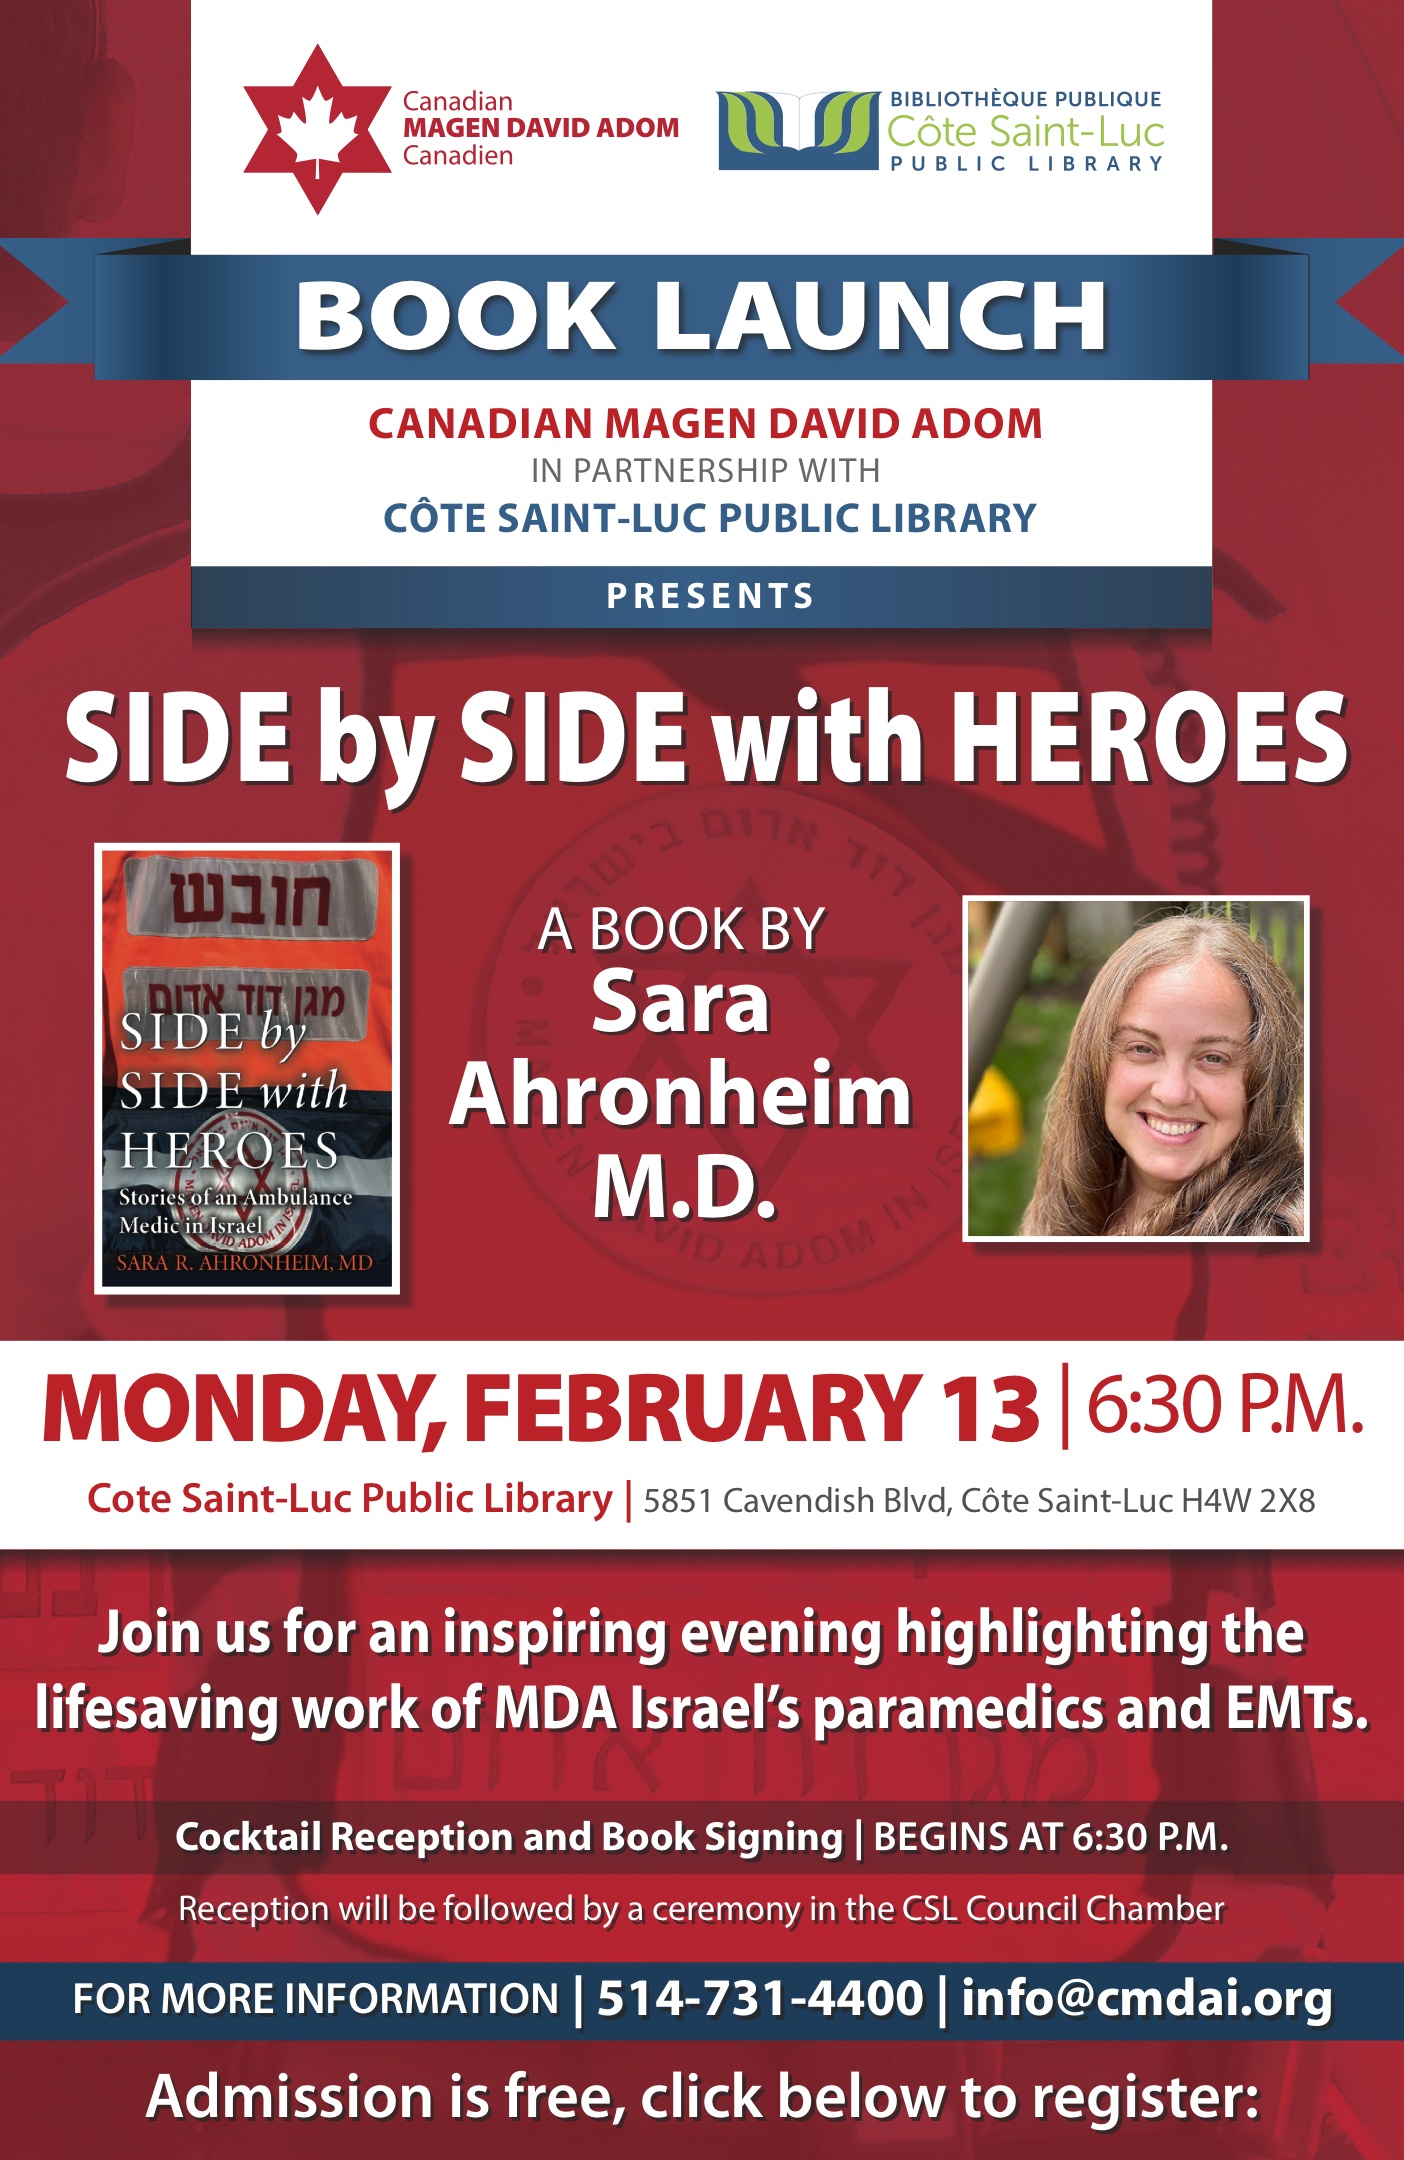 Canadian Magen David Adom and Côte Saint-Luc Public Library – Book Launch, Side by Side with Heroes, a book by Sara Ahronheim M.D. - Monday, February 13, 2023